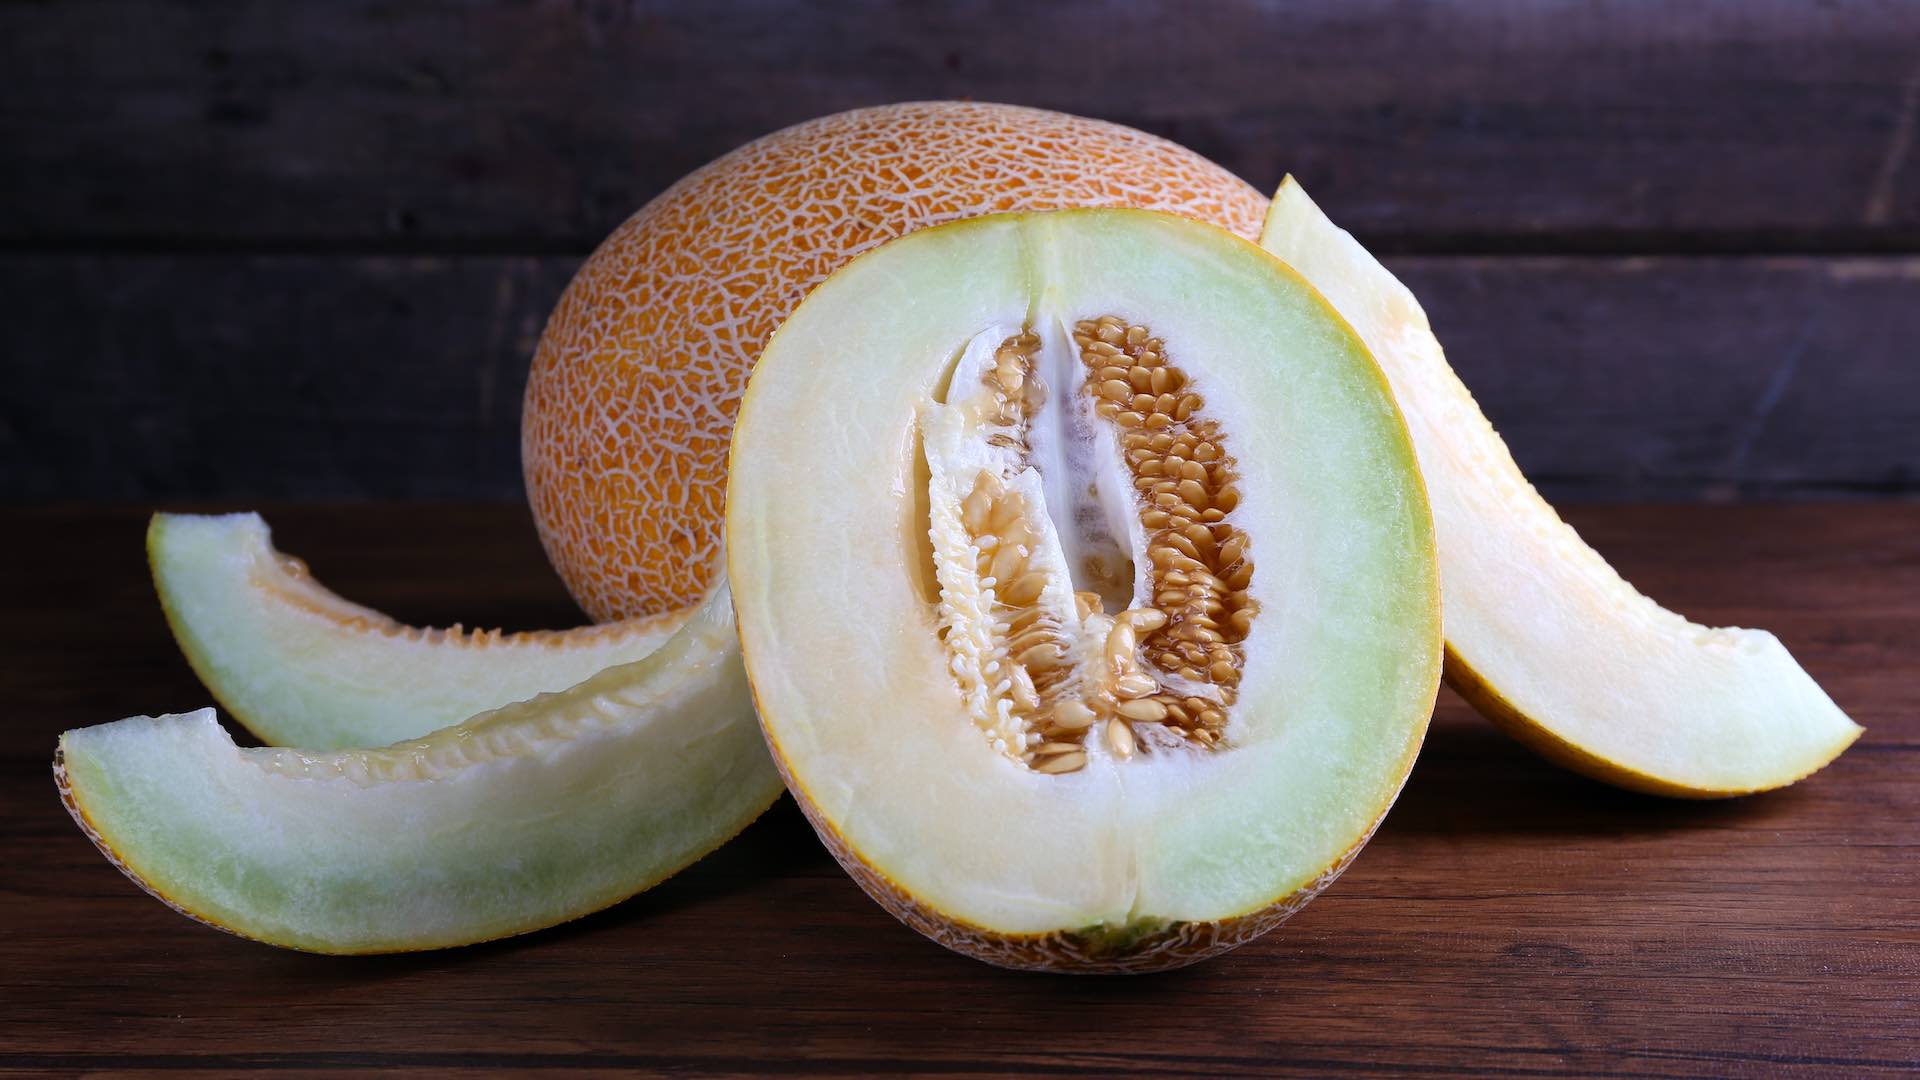 U.S. health authorities issue alert over salmonella-tainted cantaloupes